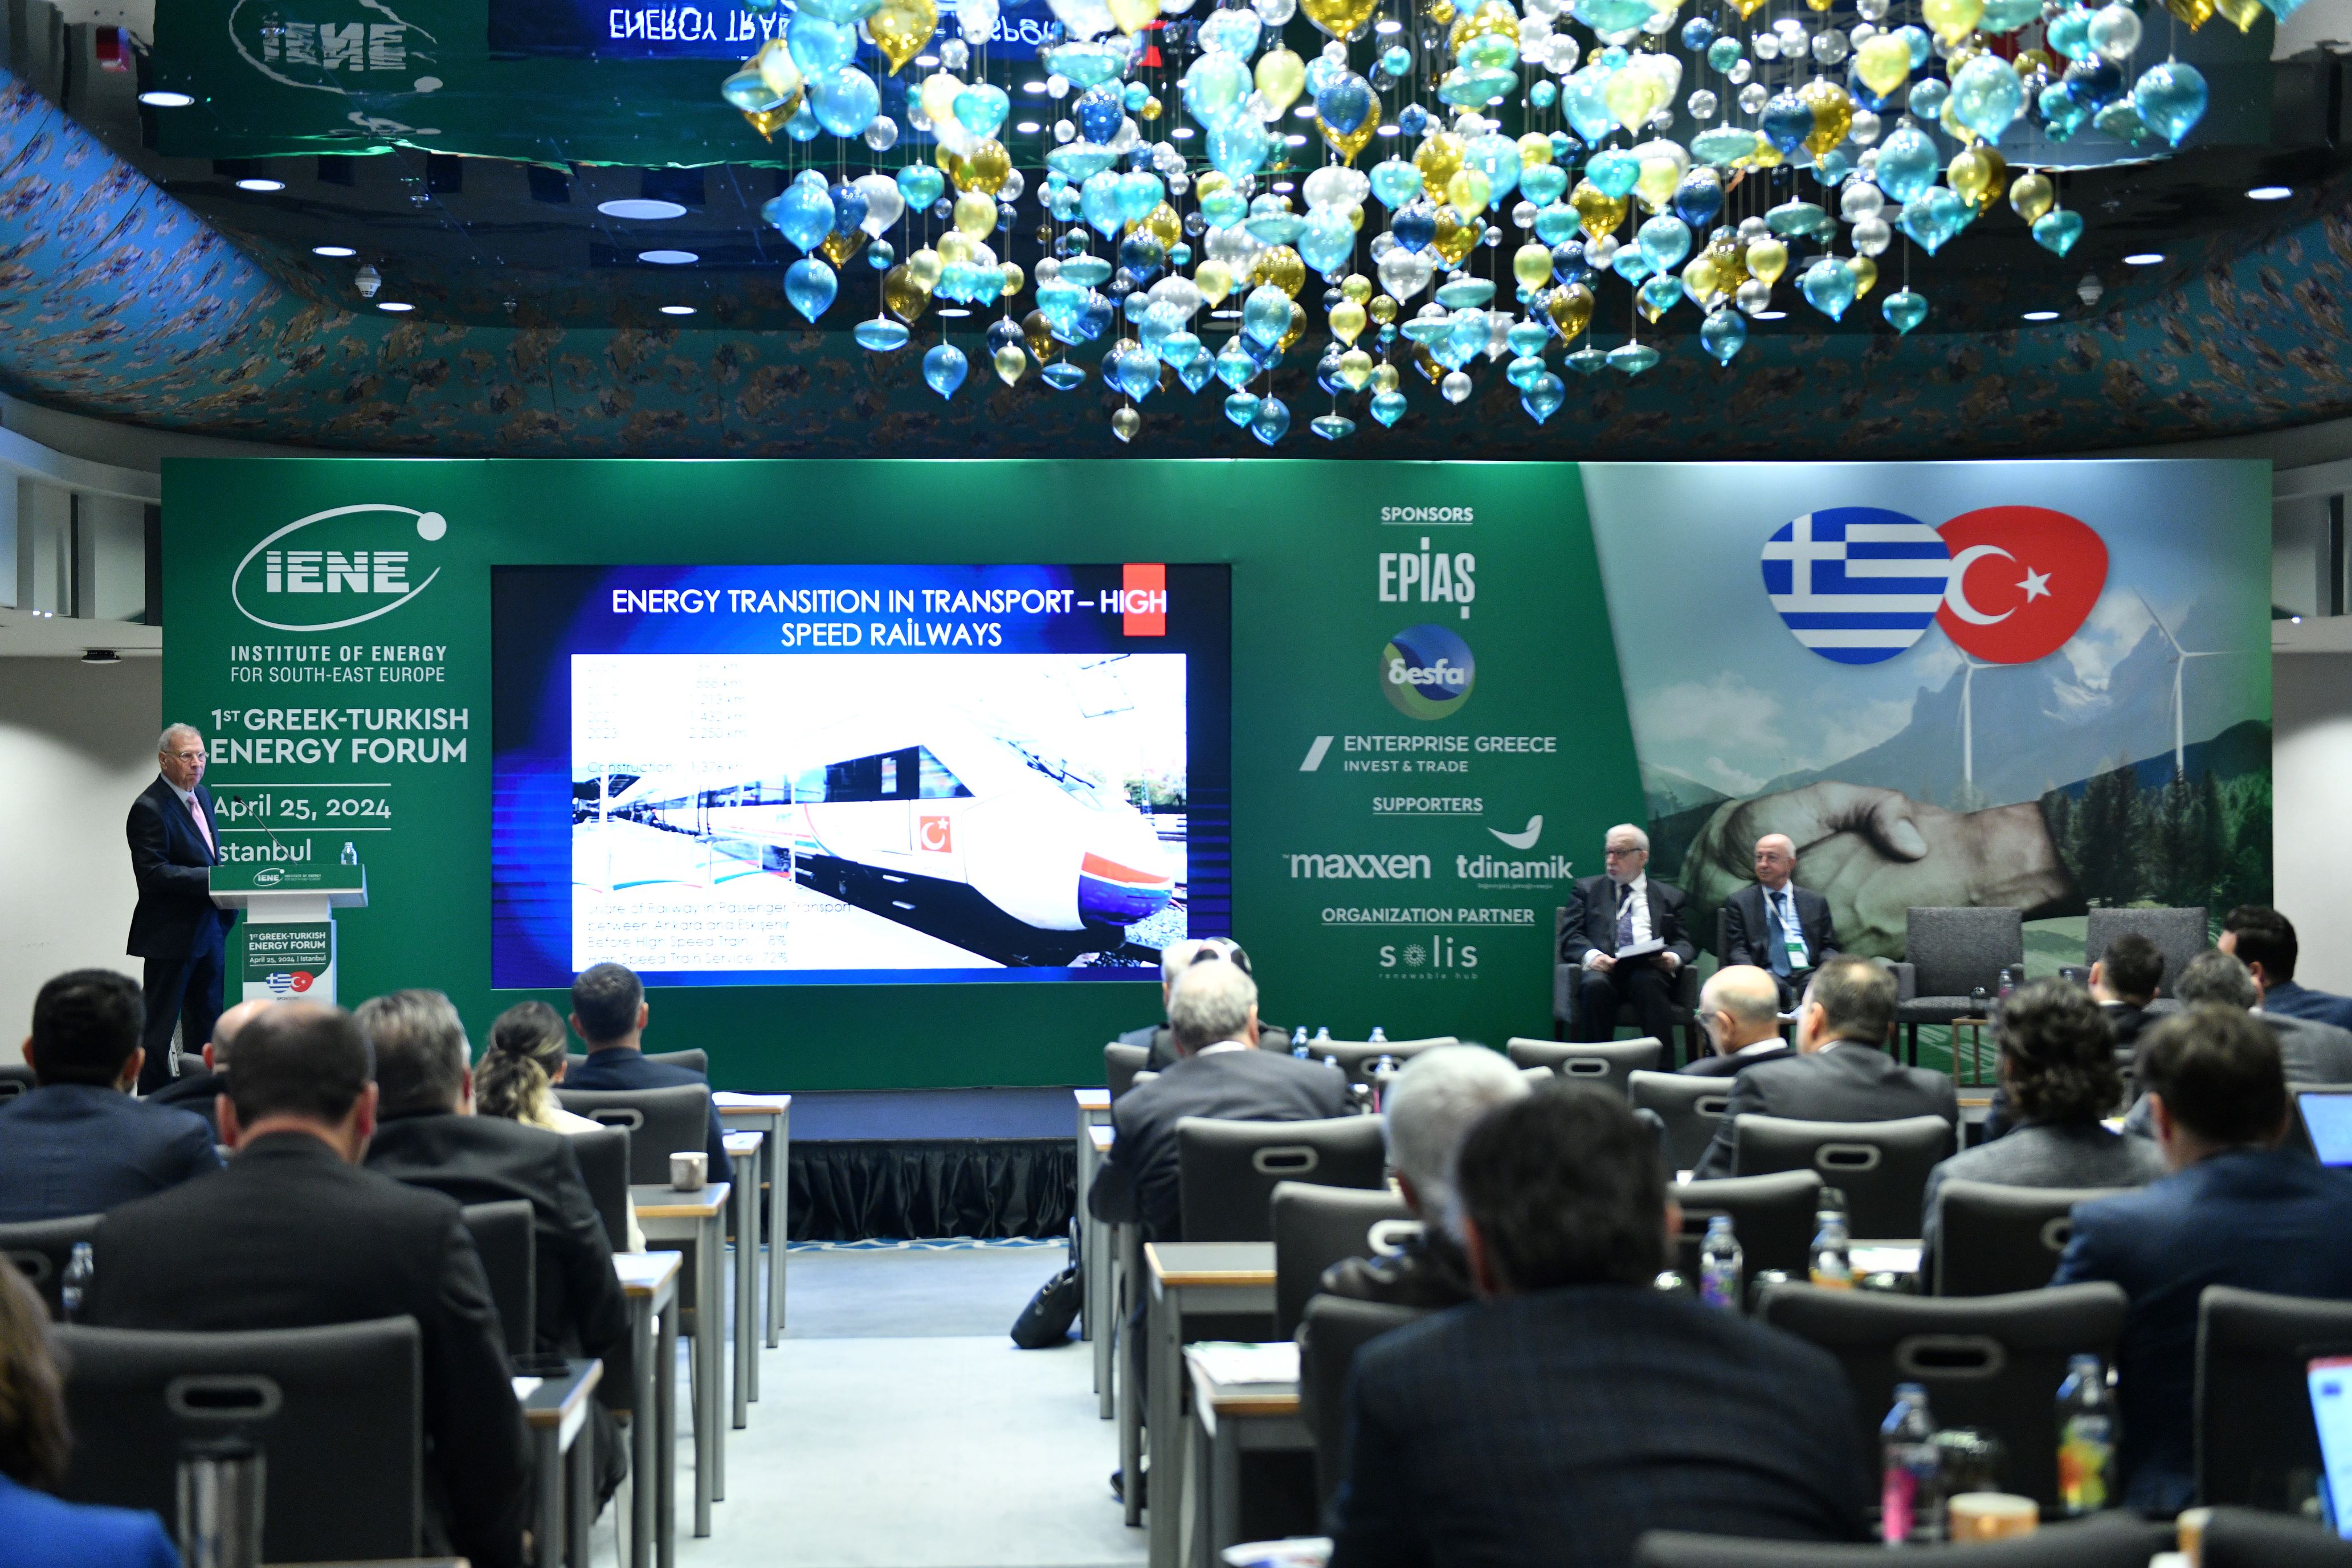 Conclusions & Recommendations of 1st ΙΕΝΕ "Greek - Turkish Energy Forum" Just Released